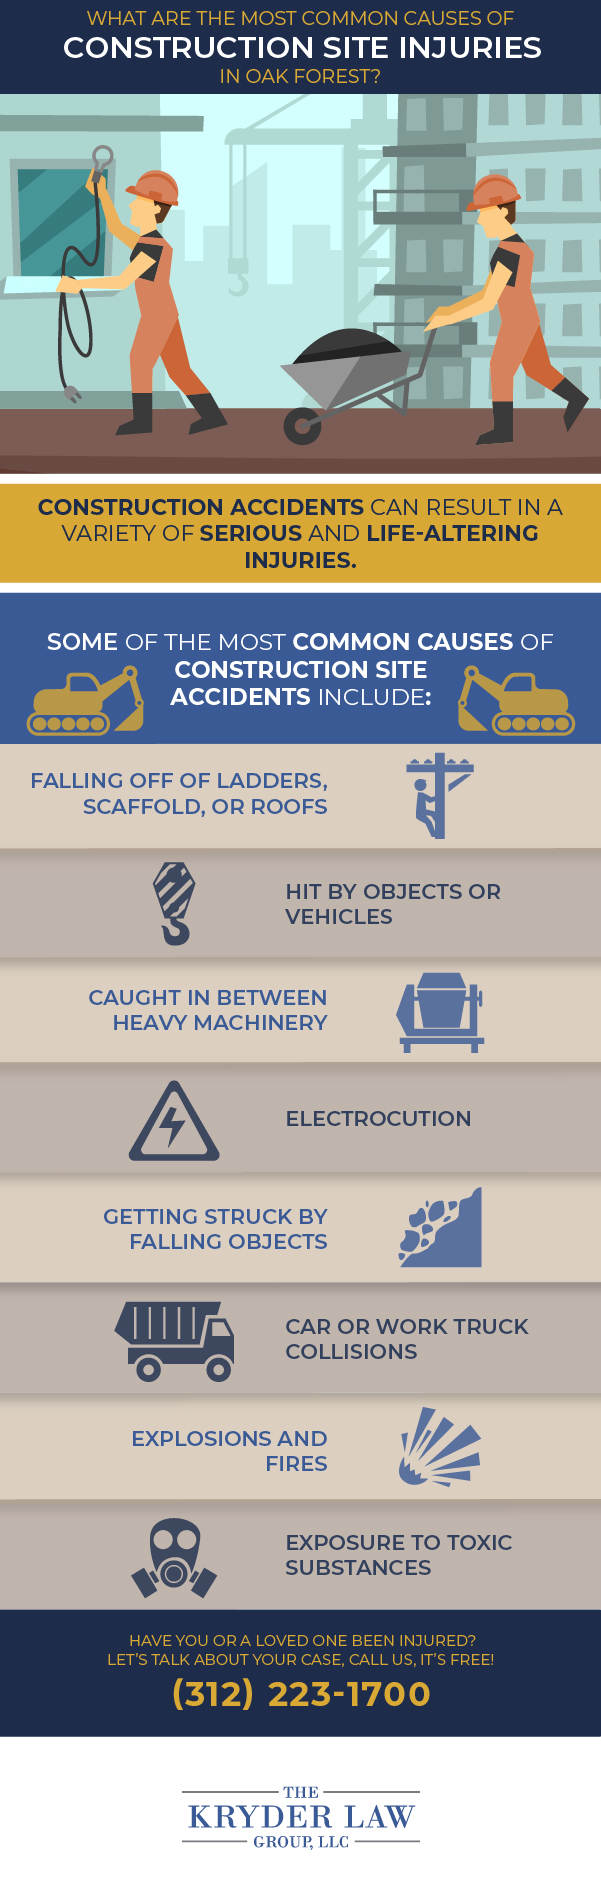 The Benefits of Hiring an Oak Forest Construction Accident Lawyer Infographic